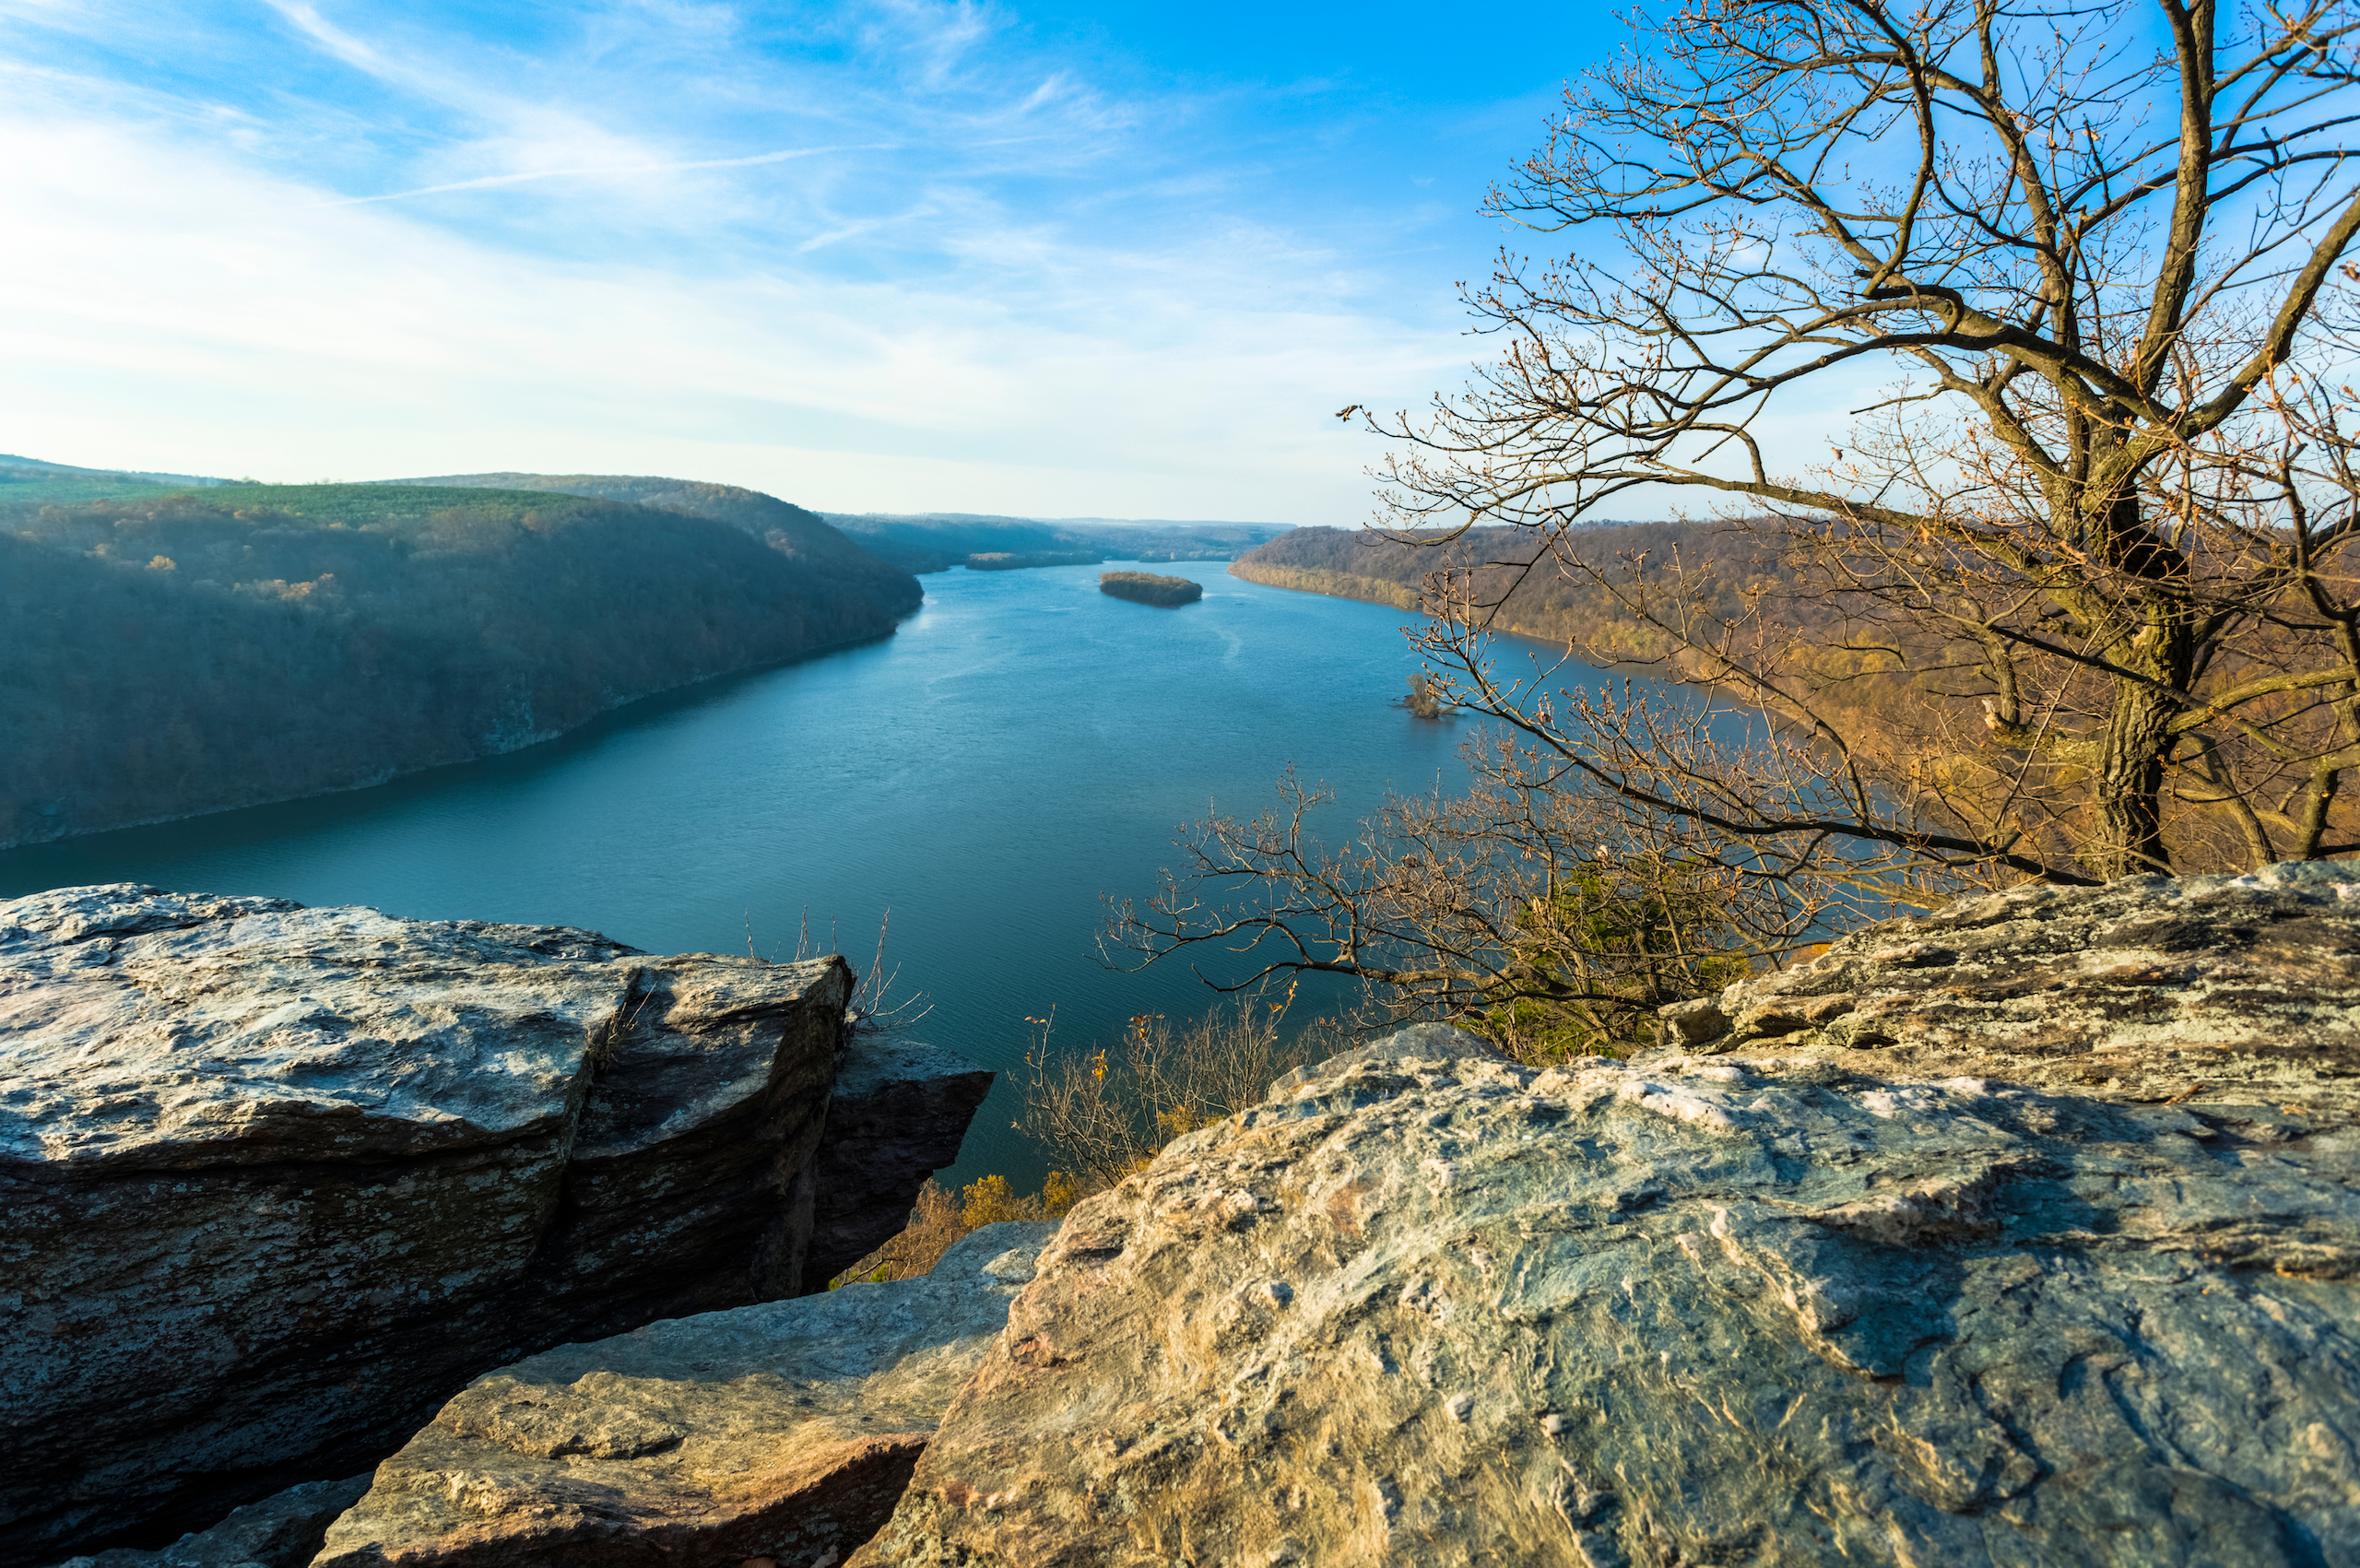 Susquehanna River | Getty Images